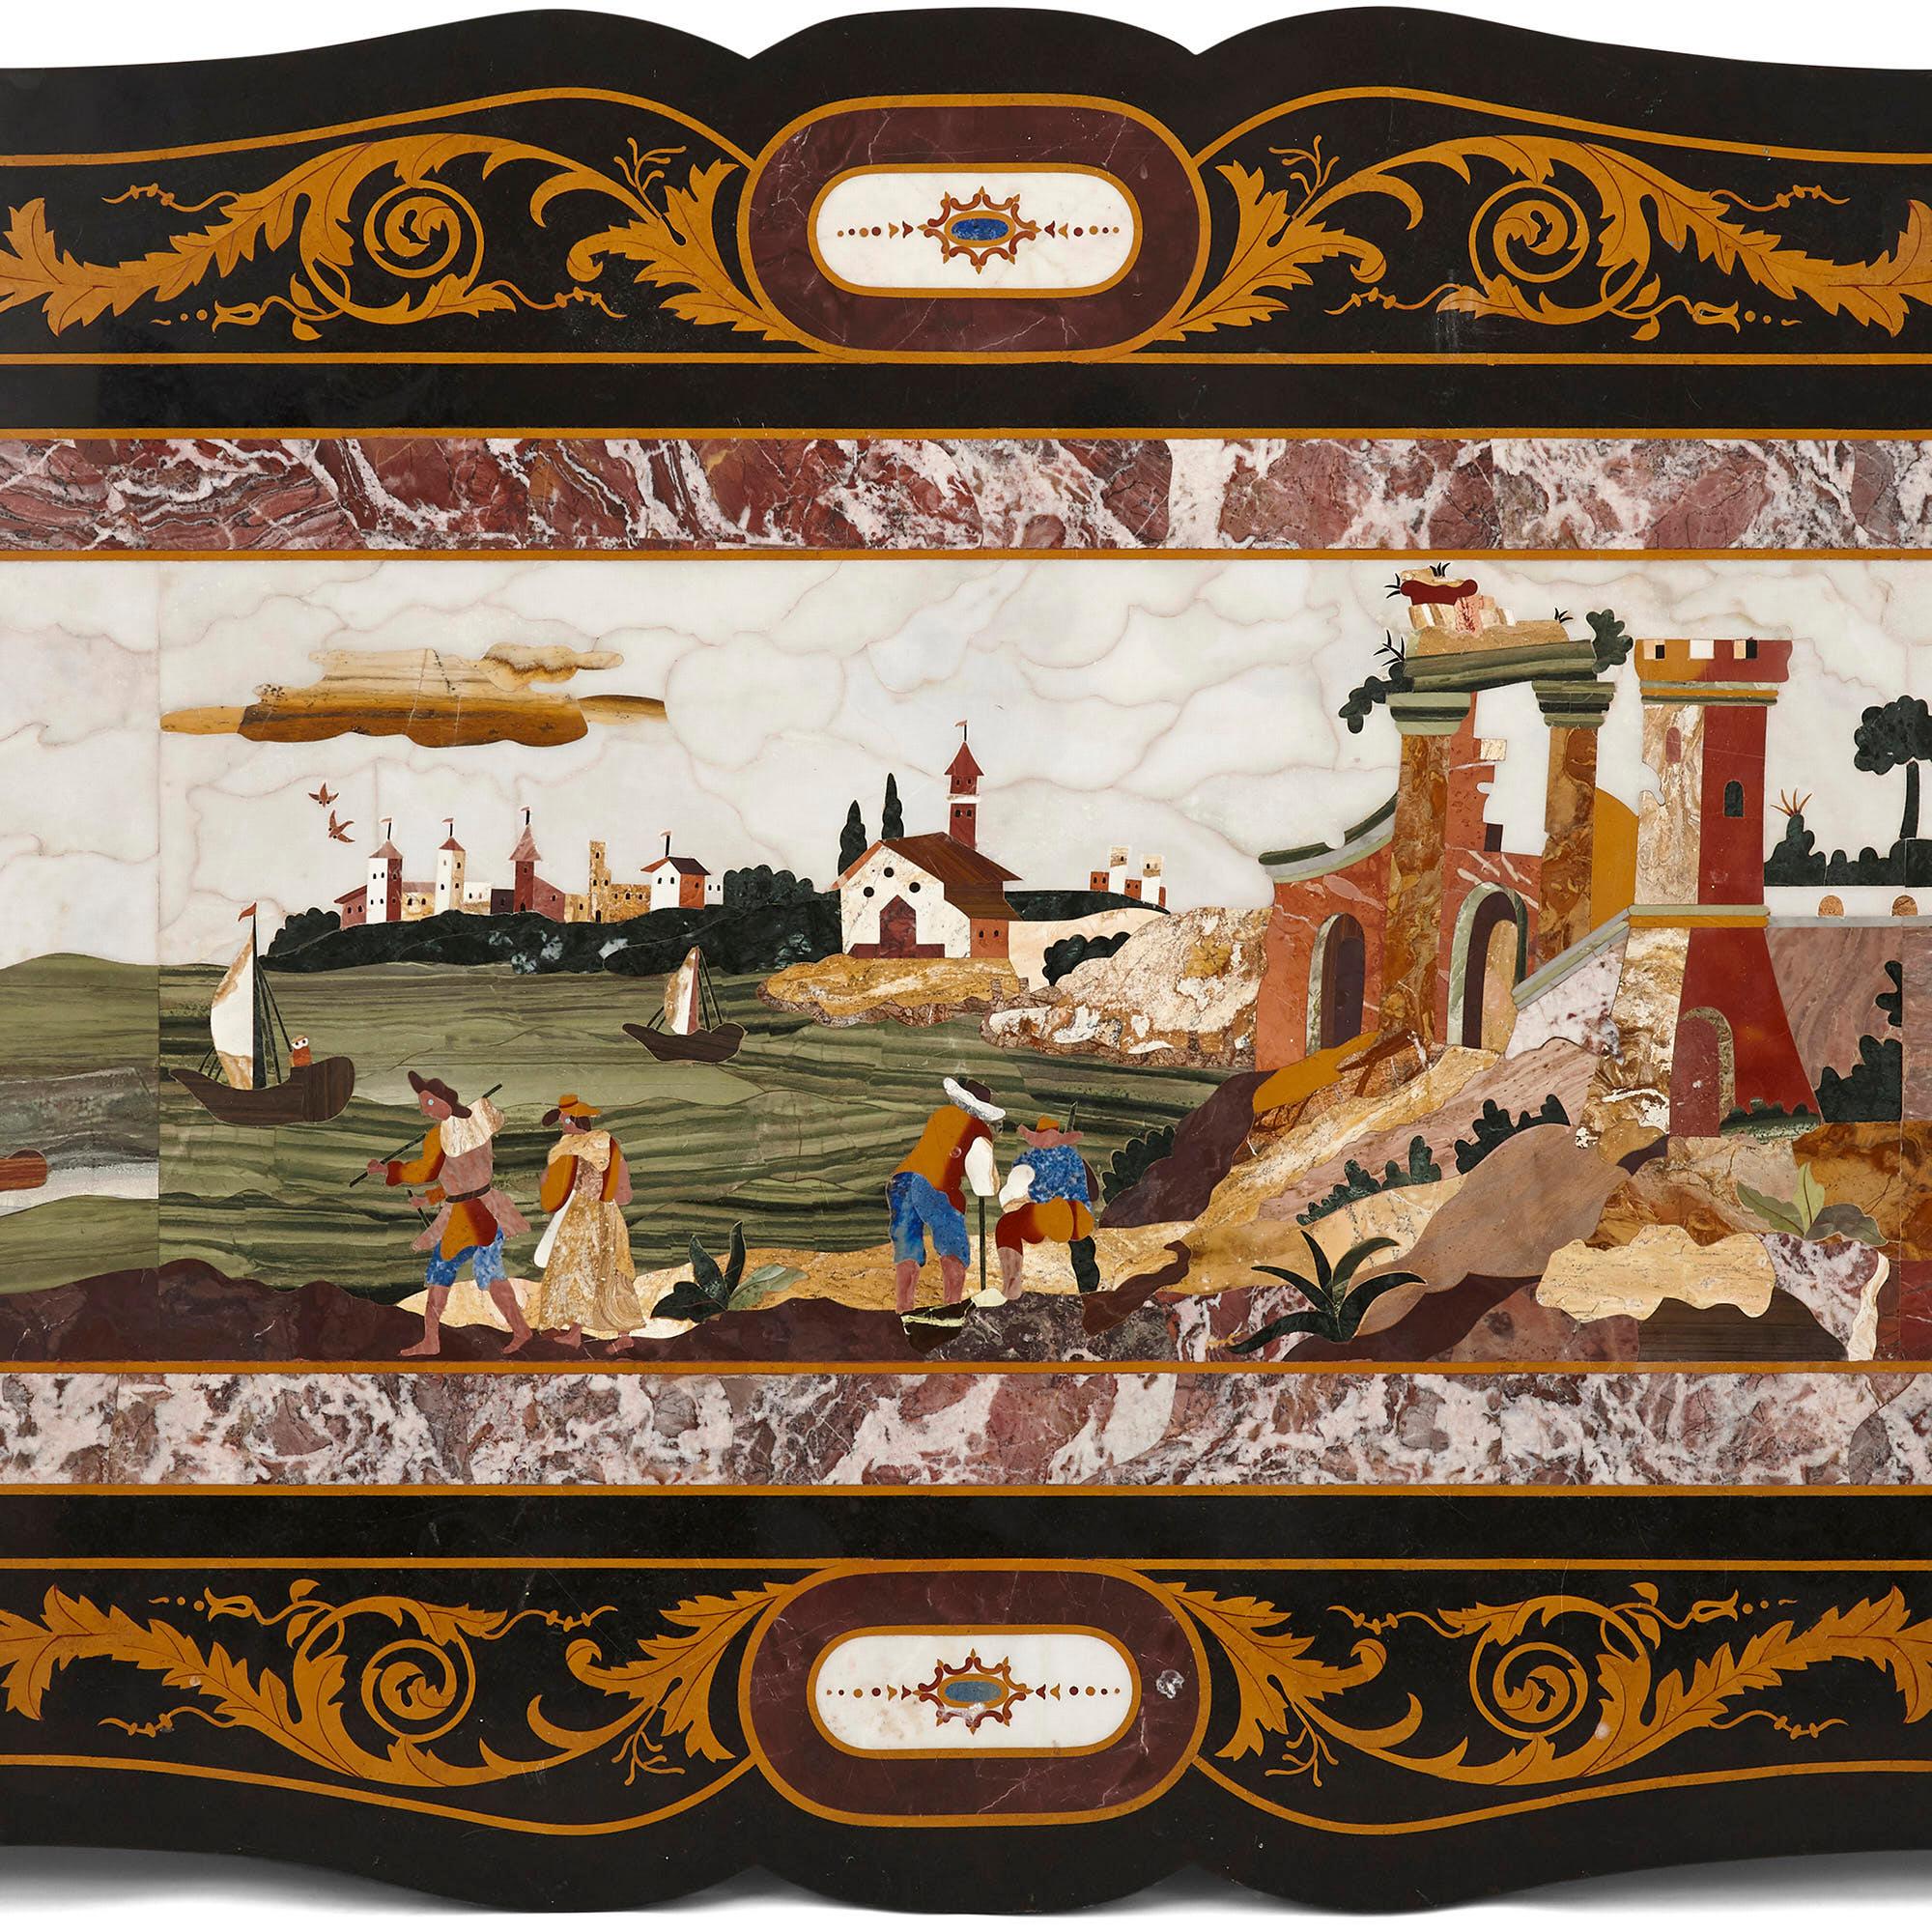 This marble tabletop features a centrally placed pictorial panel executed in Pietra Dura. The panel is surrounded by a frame composed of inlaid purple veined marble that is encompassed by an orange marble border. This panel-and-frame sits within the